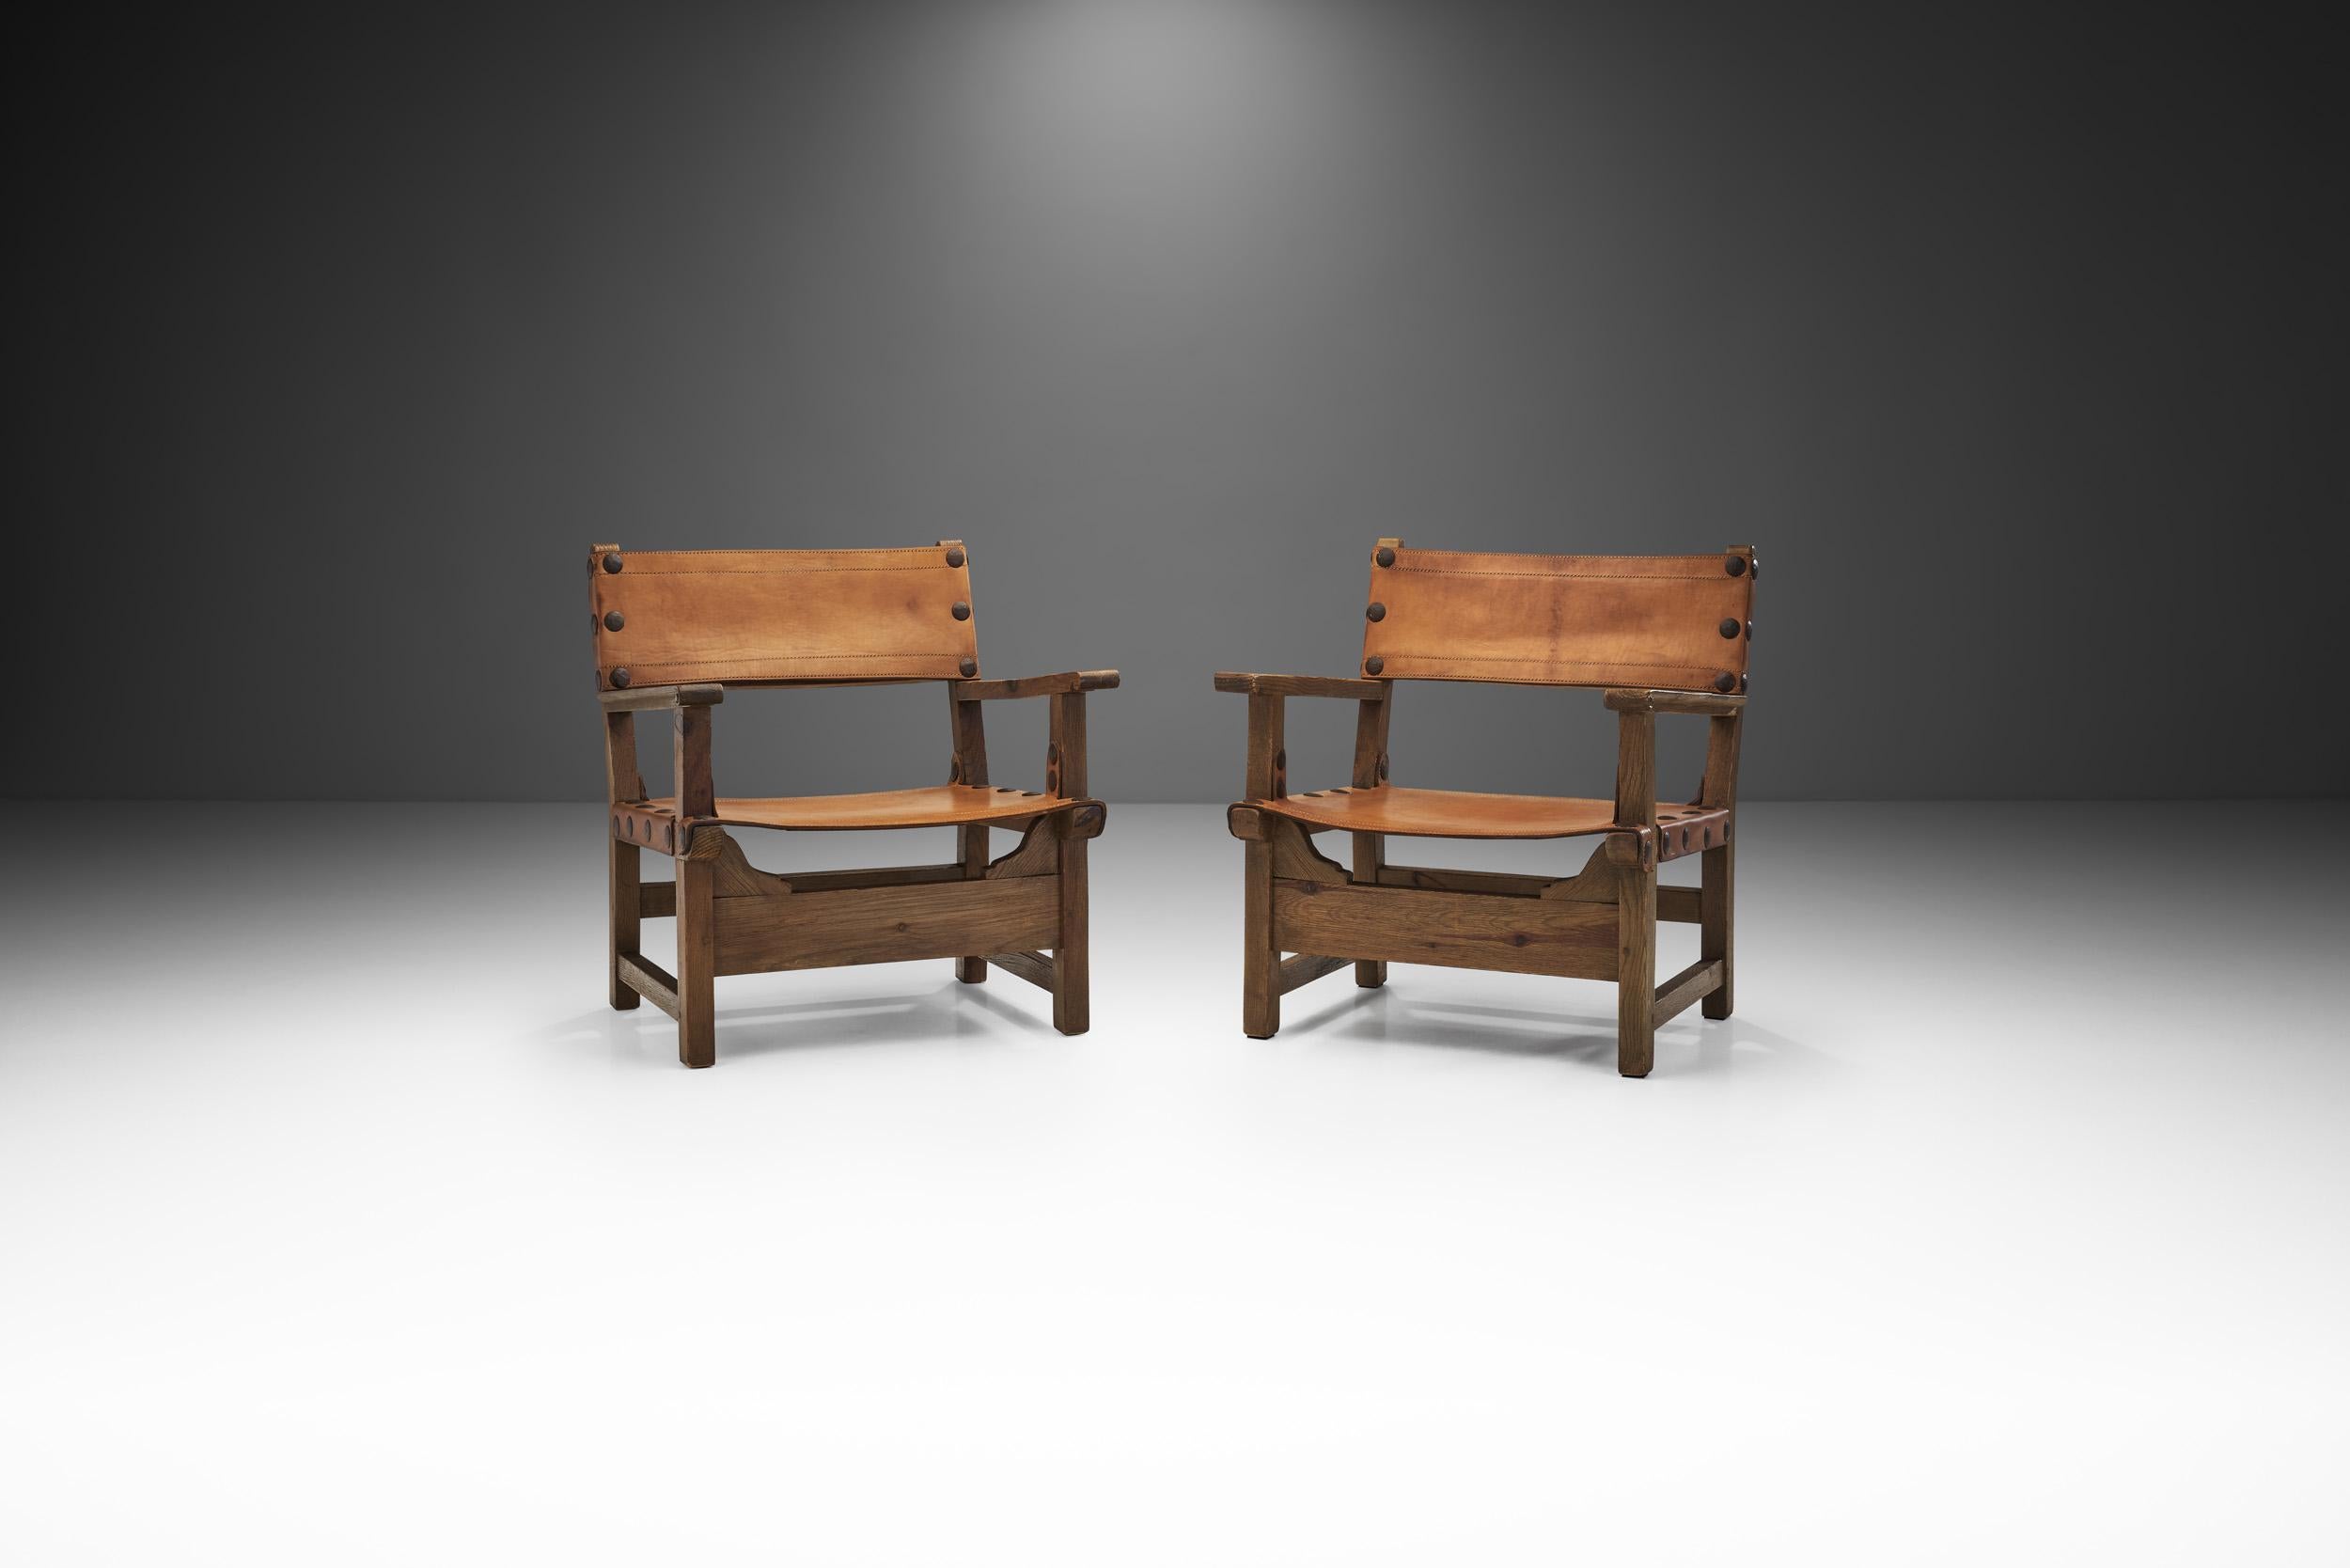 This pair of chairs might seem bold and rugged at first glance, however, at closer inspection, it is clear that the design is very well-thought-out; the lines are precisely sculpted, and the joinery precise and tight.

These so-called “Spanish